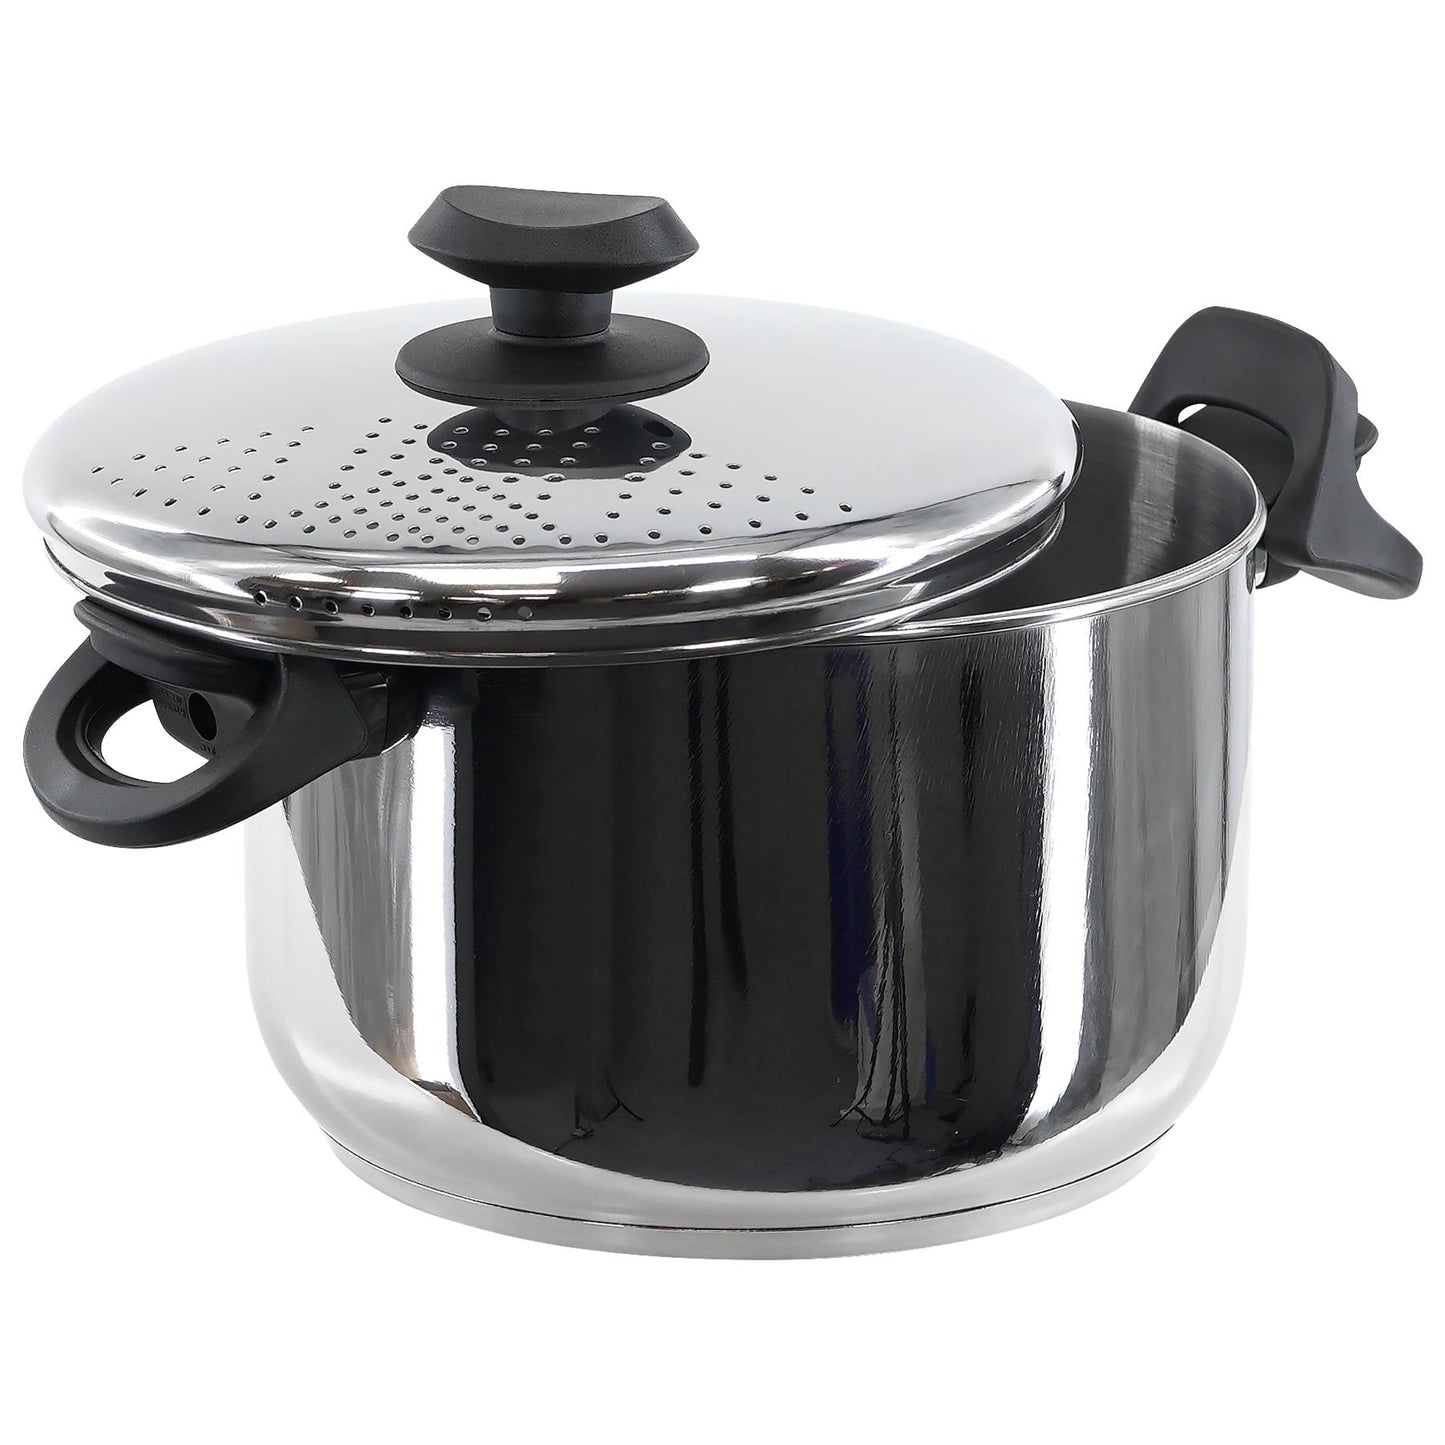 Stainless Steel Pasta Pot With Locking Strainer Lid by GEEZY - UKBuyZone